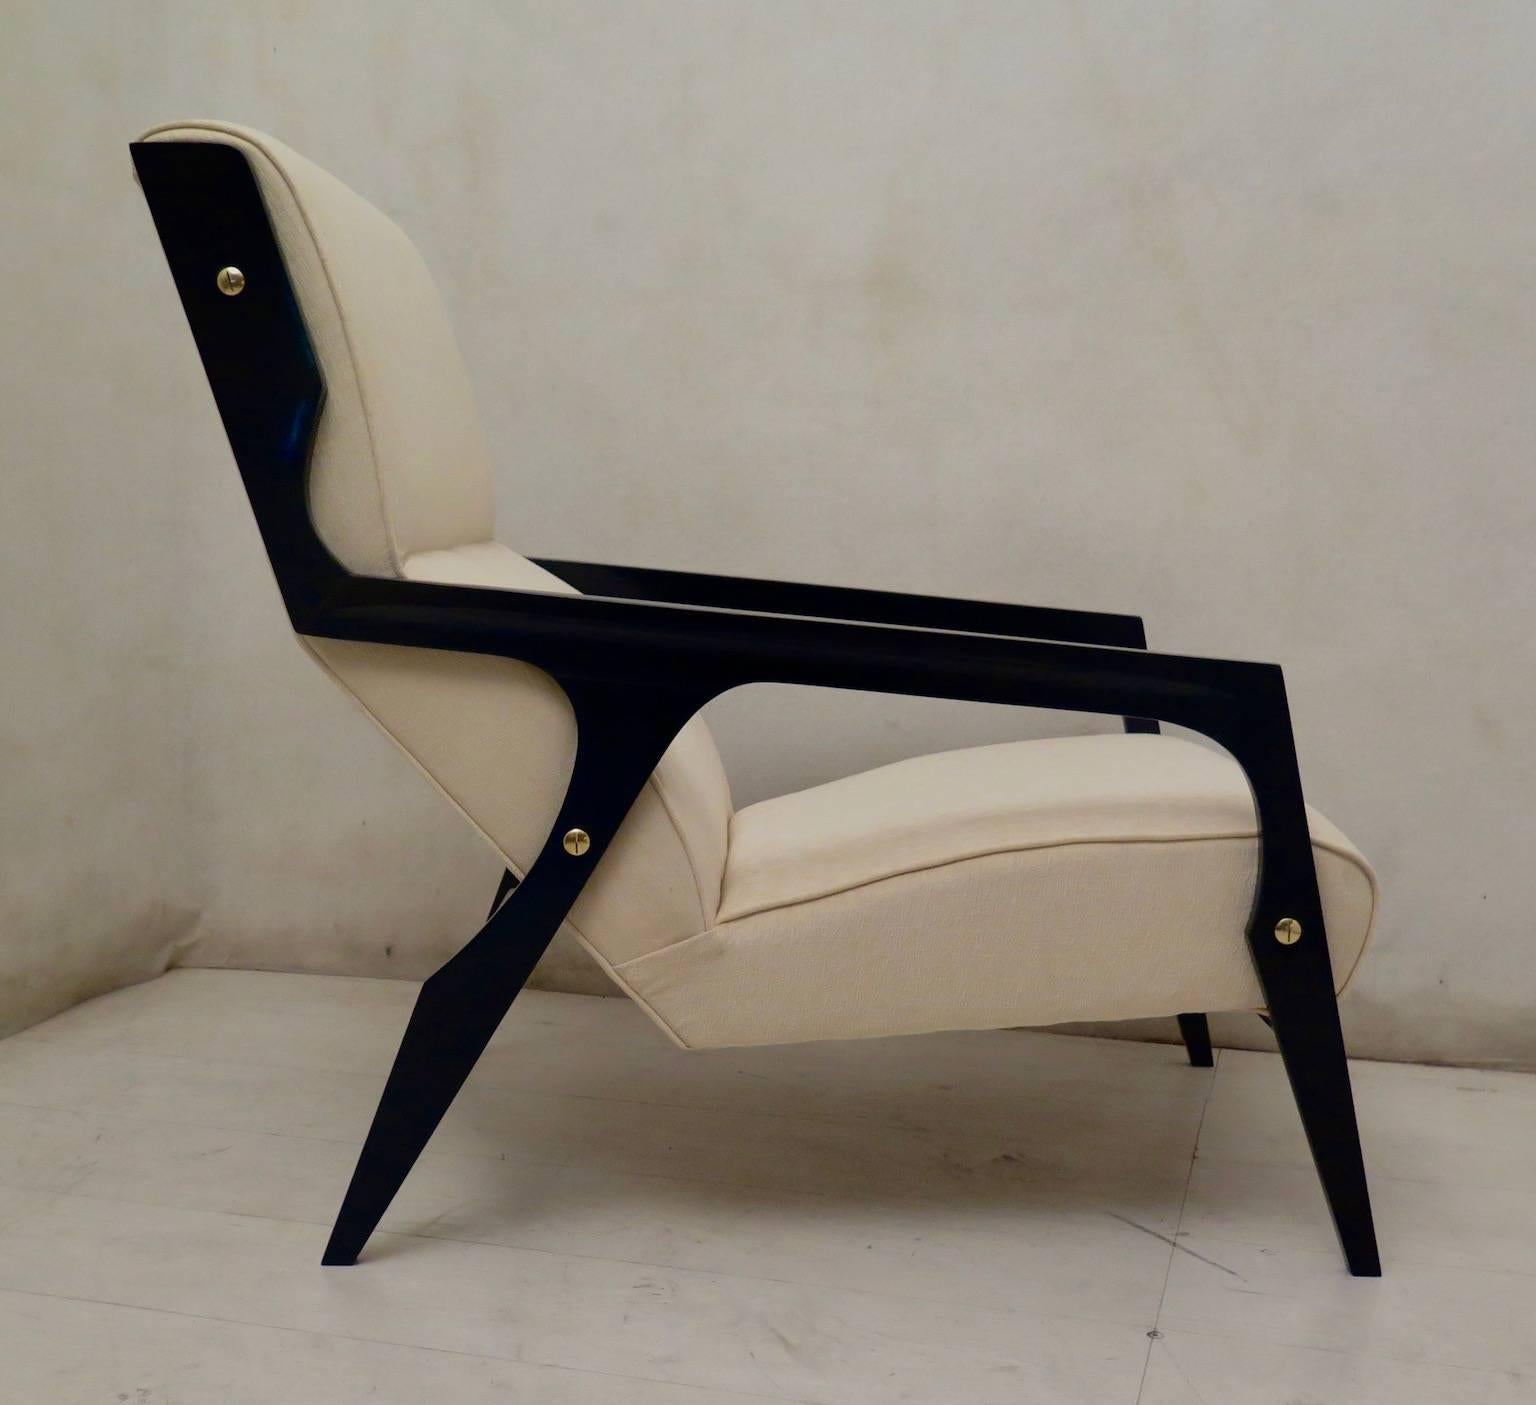 Beautiful armchairs in characteristic Italian style of Paolo Buffa, Vittorio Dassi and Osvaldo Borsani.  

Structure completely in wood polished in black lacquer, sitting covered in particular white fine velvet. Very nice to follow is the movement